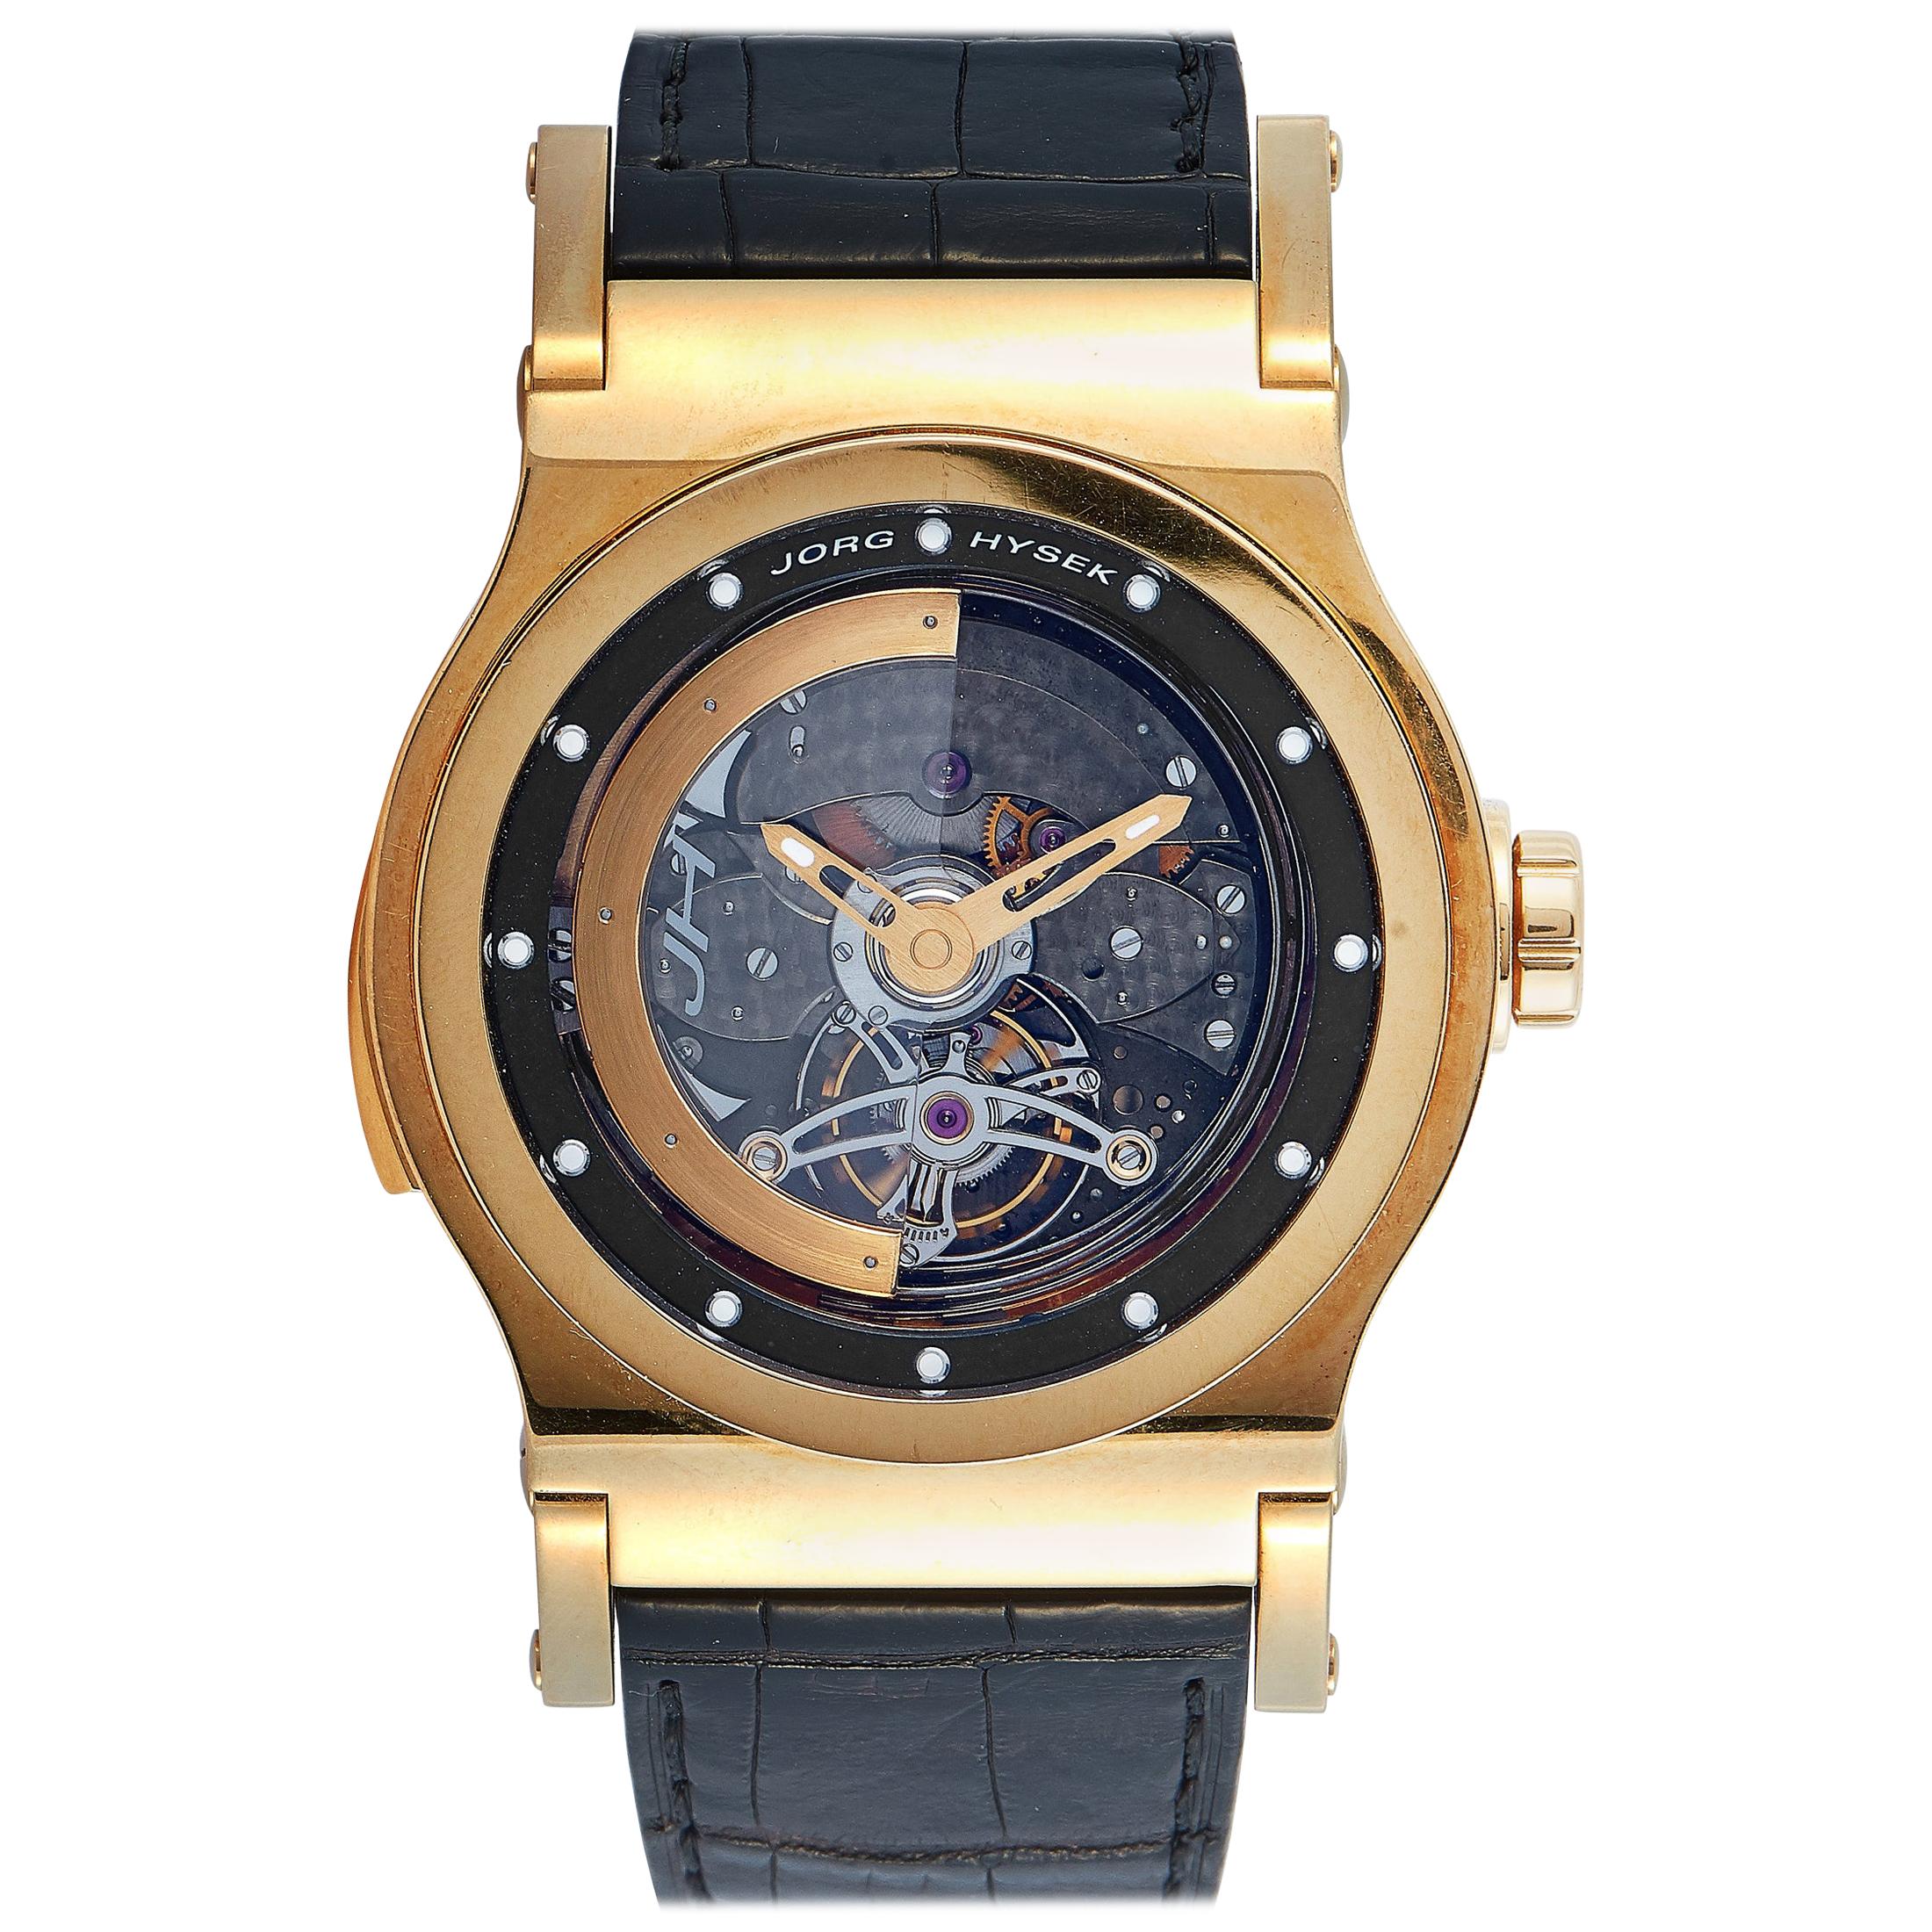 Jorg Hysek Limited Edition Minute Repeater Tourbillon Watch